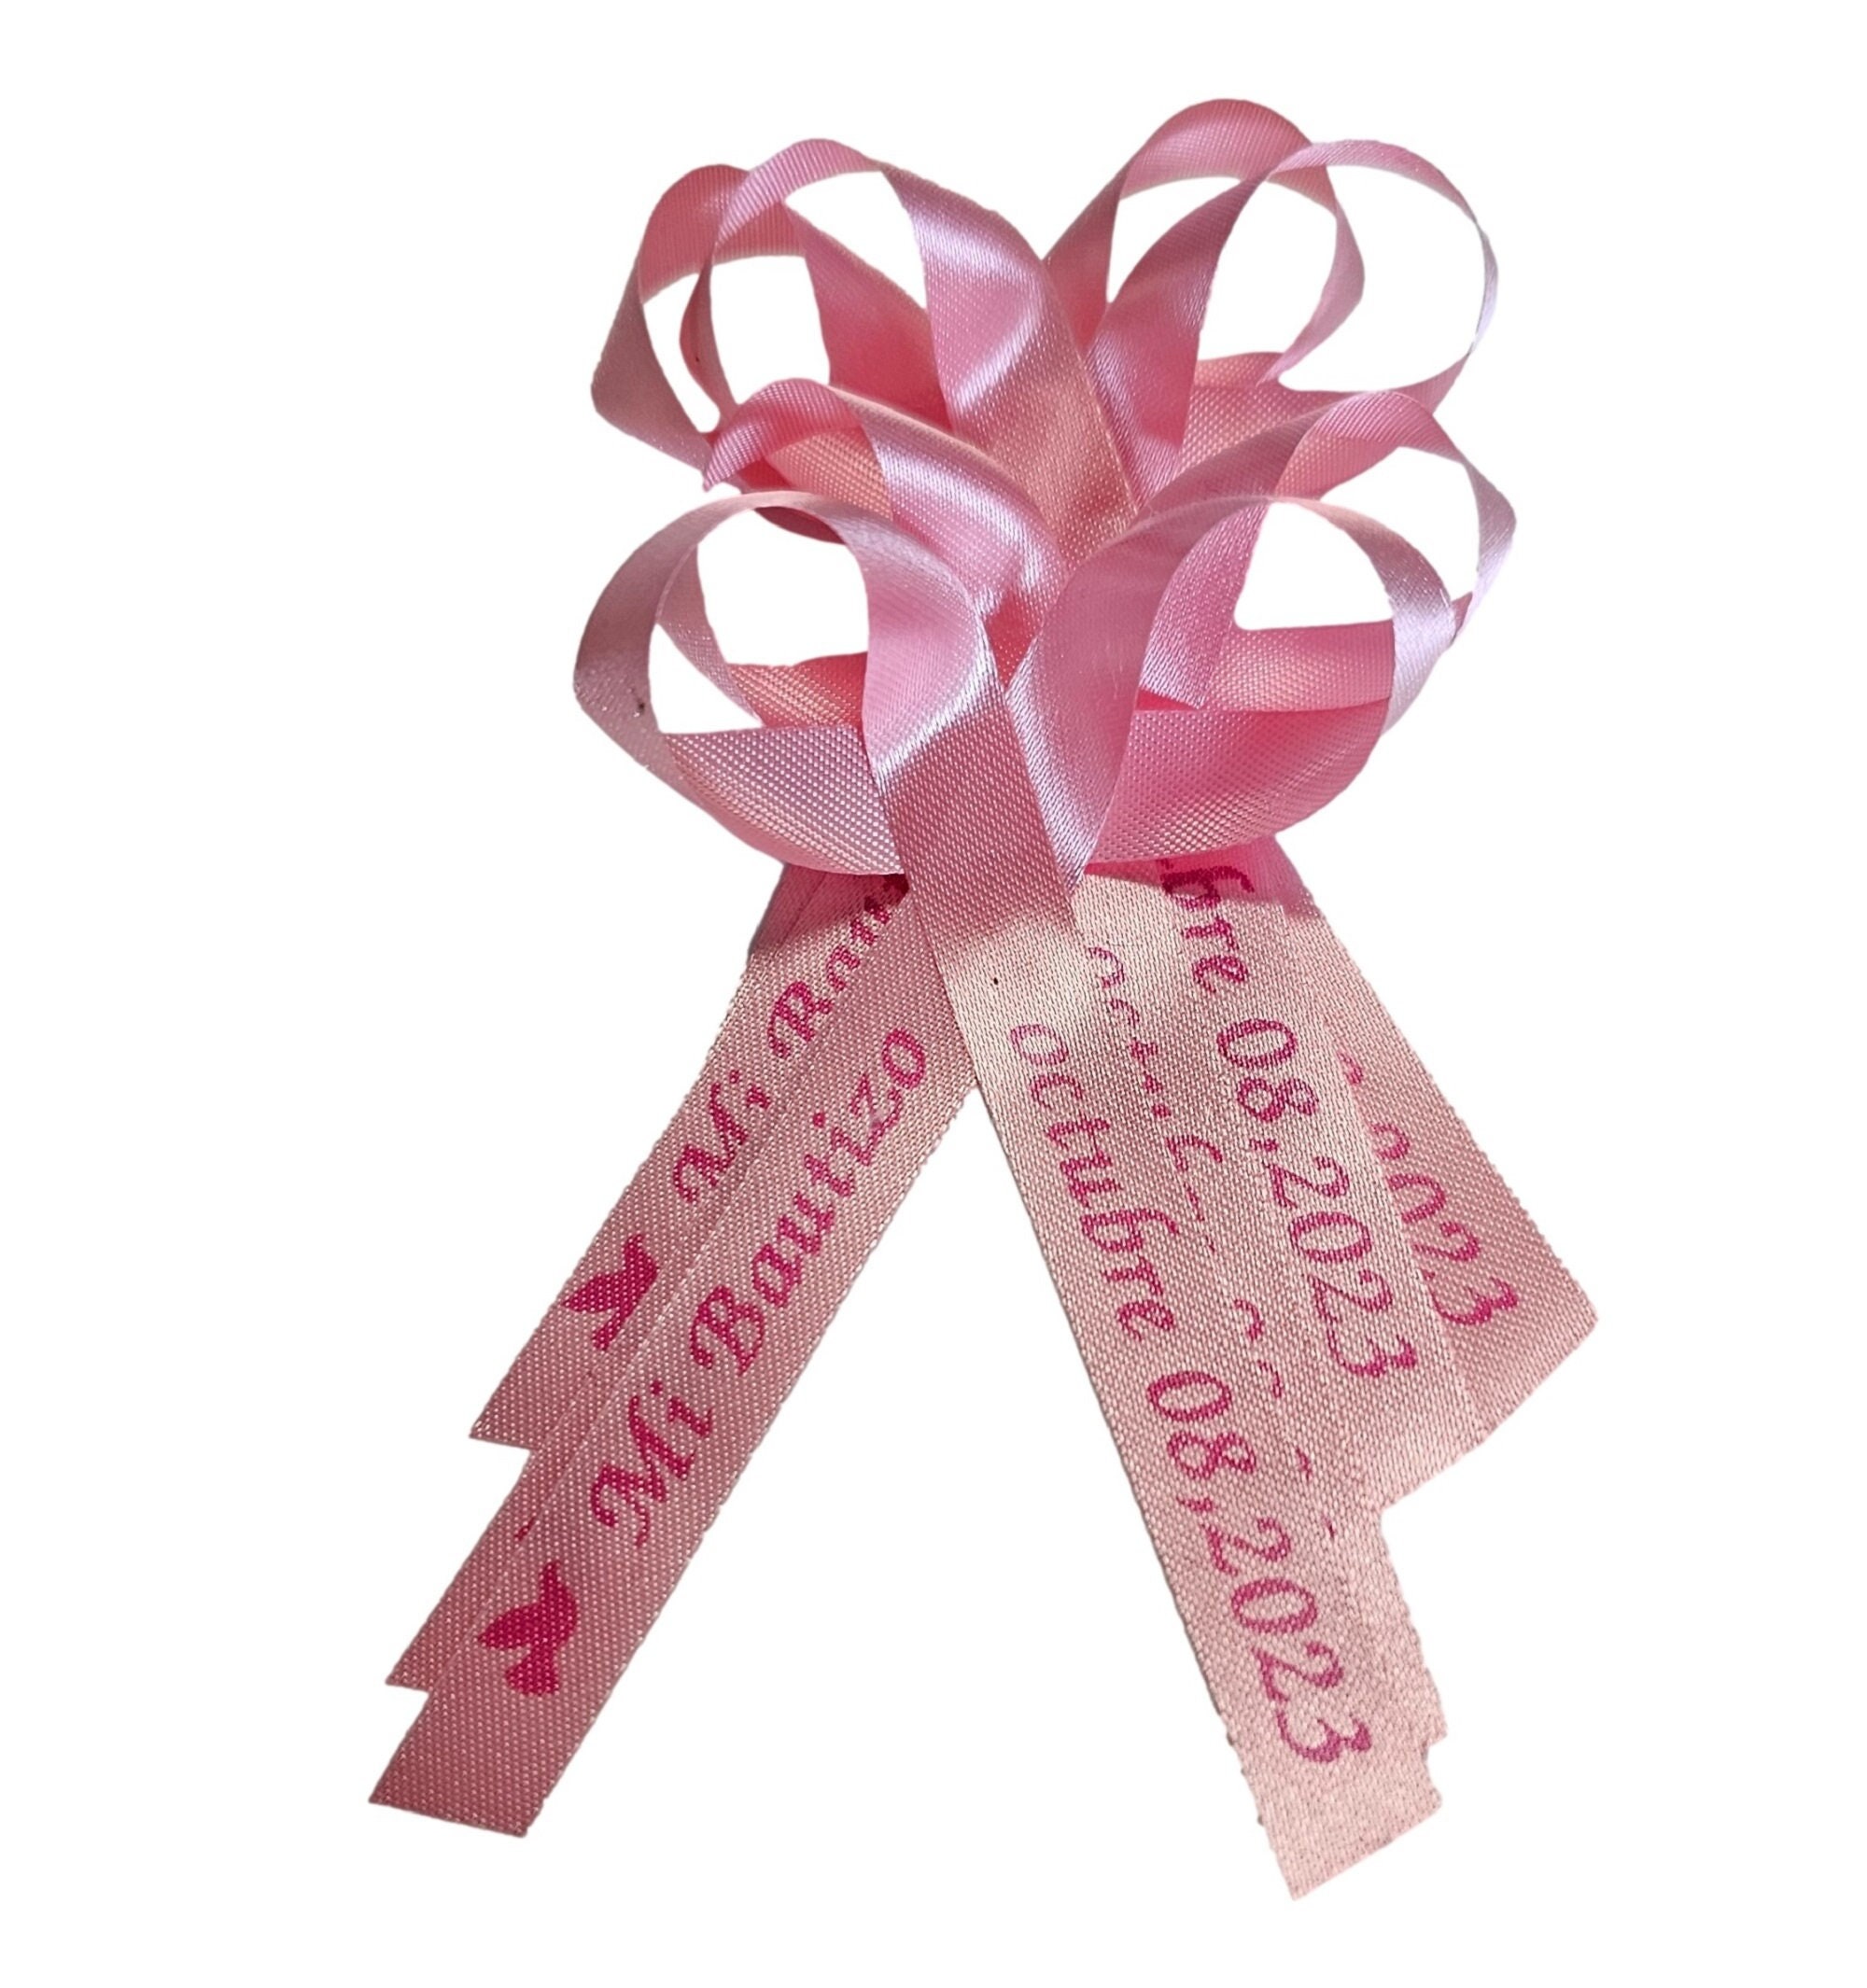 Award ribbon for baby shower party Stock Photo by ©belchonock 172529828